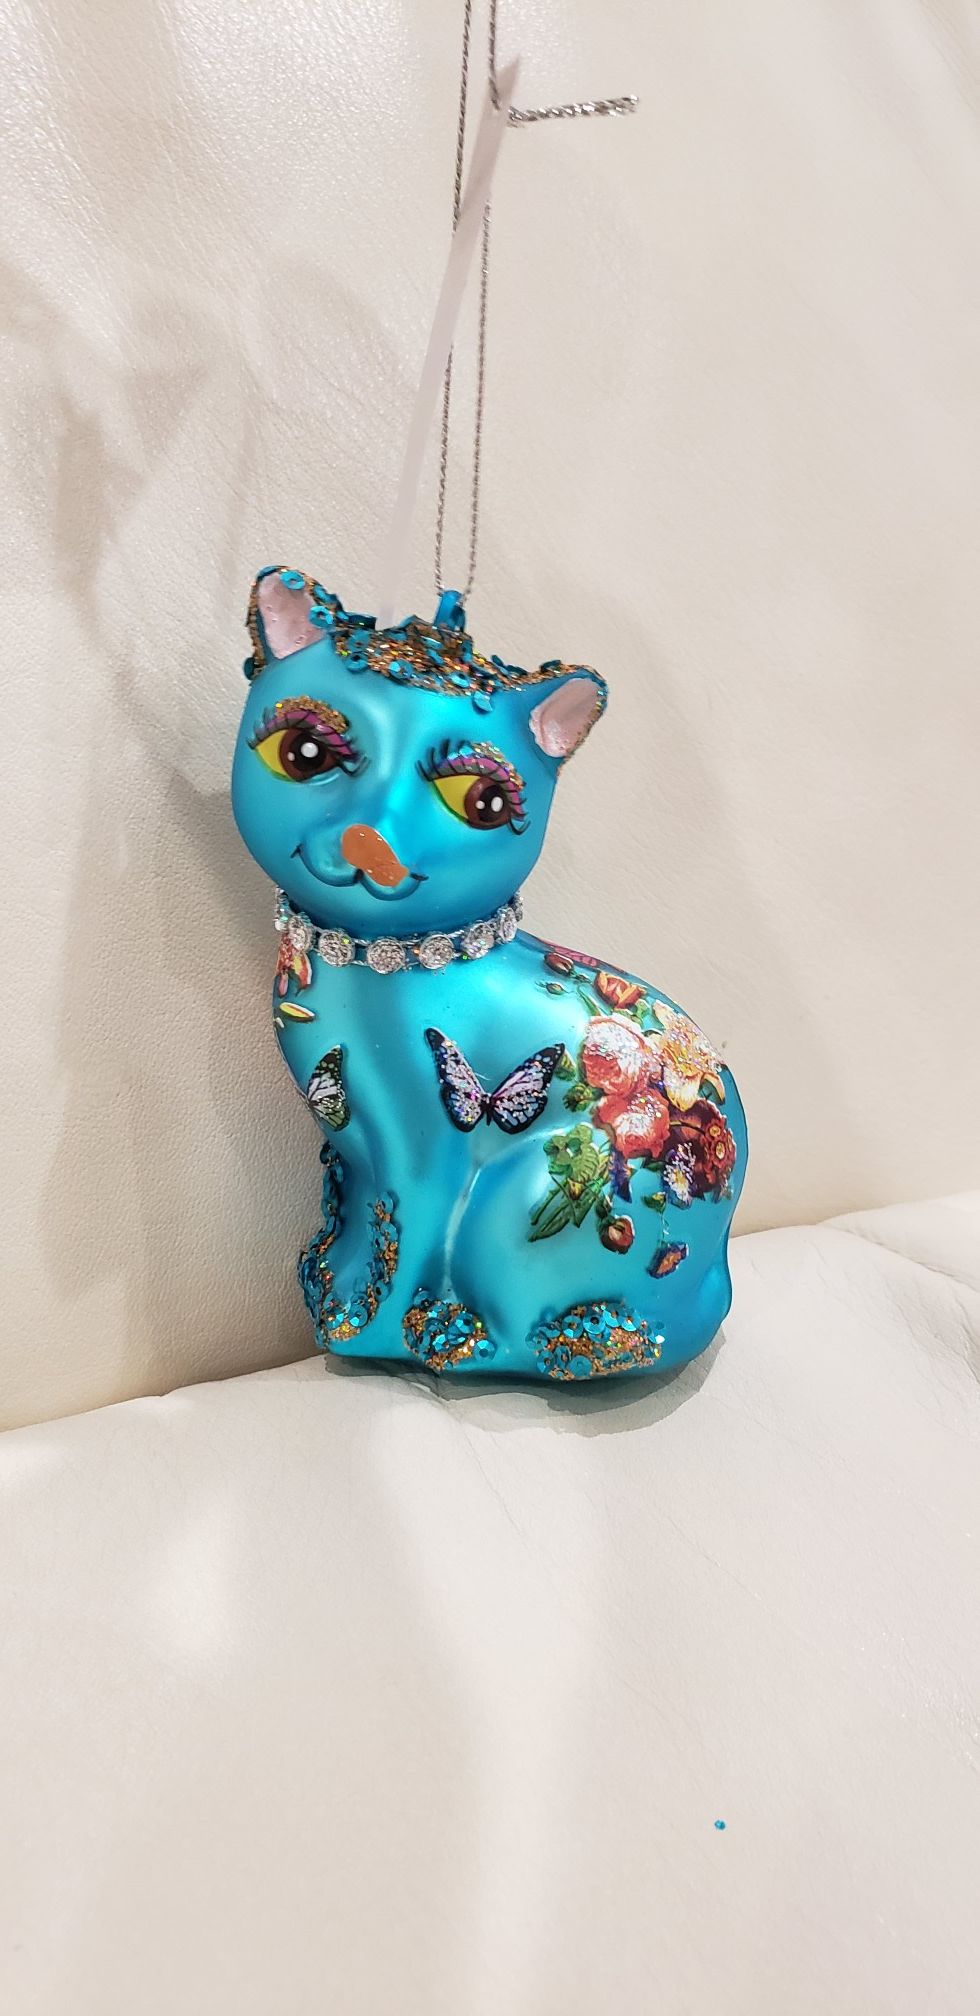 Butterfly floral cat animal decoration. Blue cat glass Christmas tree ornament 4x3" brand new with tags with